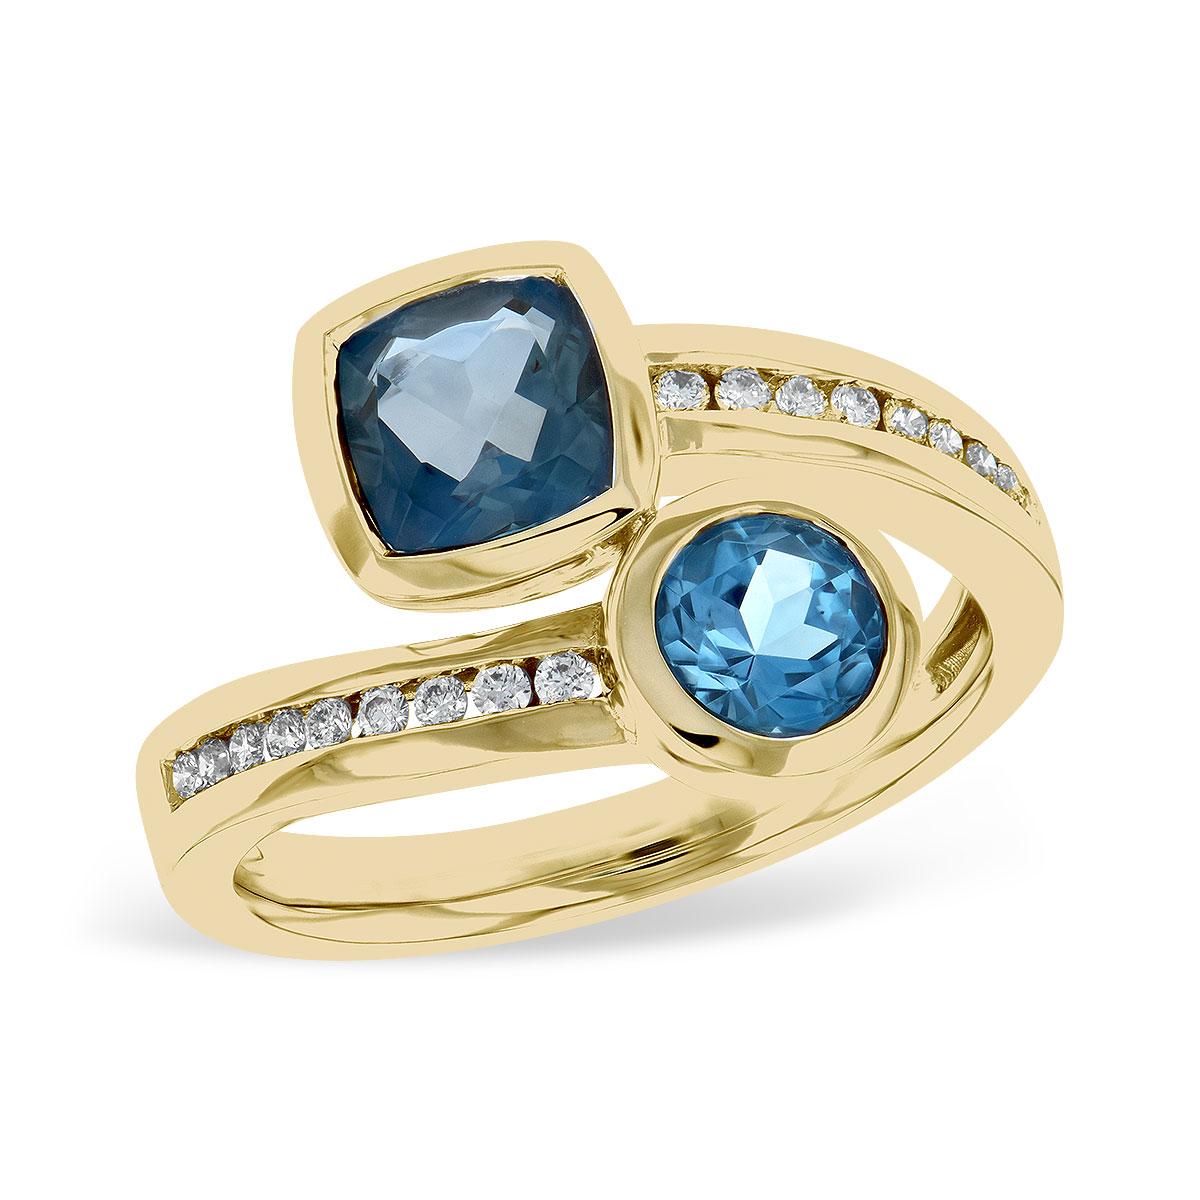 Create Your Dream Ring with Our Expert Designers